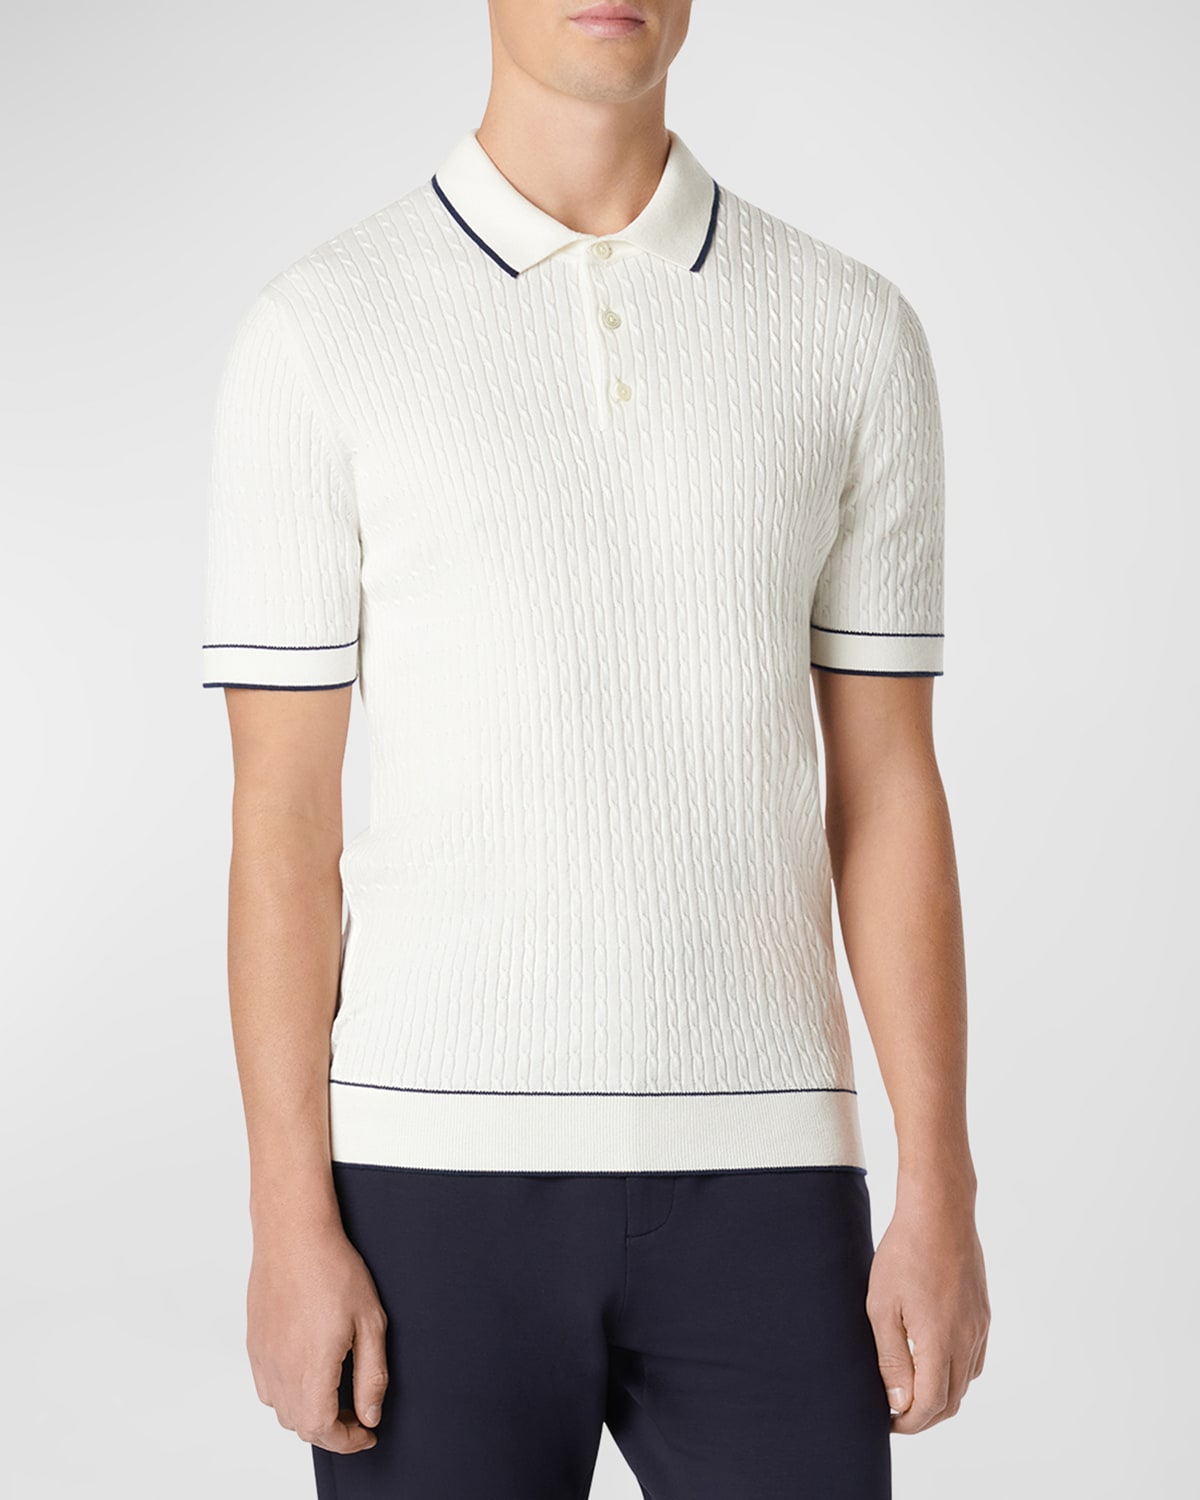 BUGATCHI MEN'S CABLE-KNIT POLO SWEATER